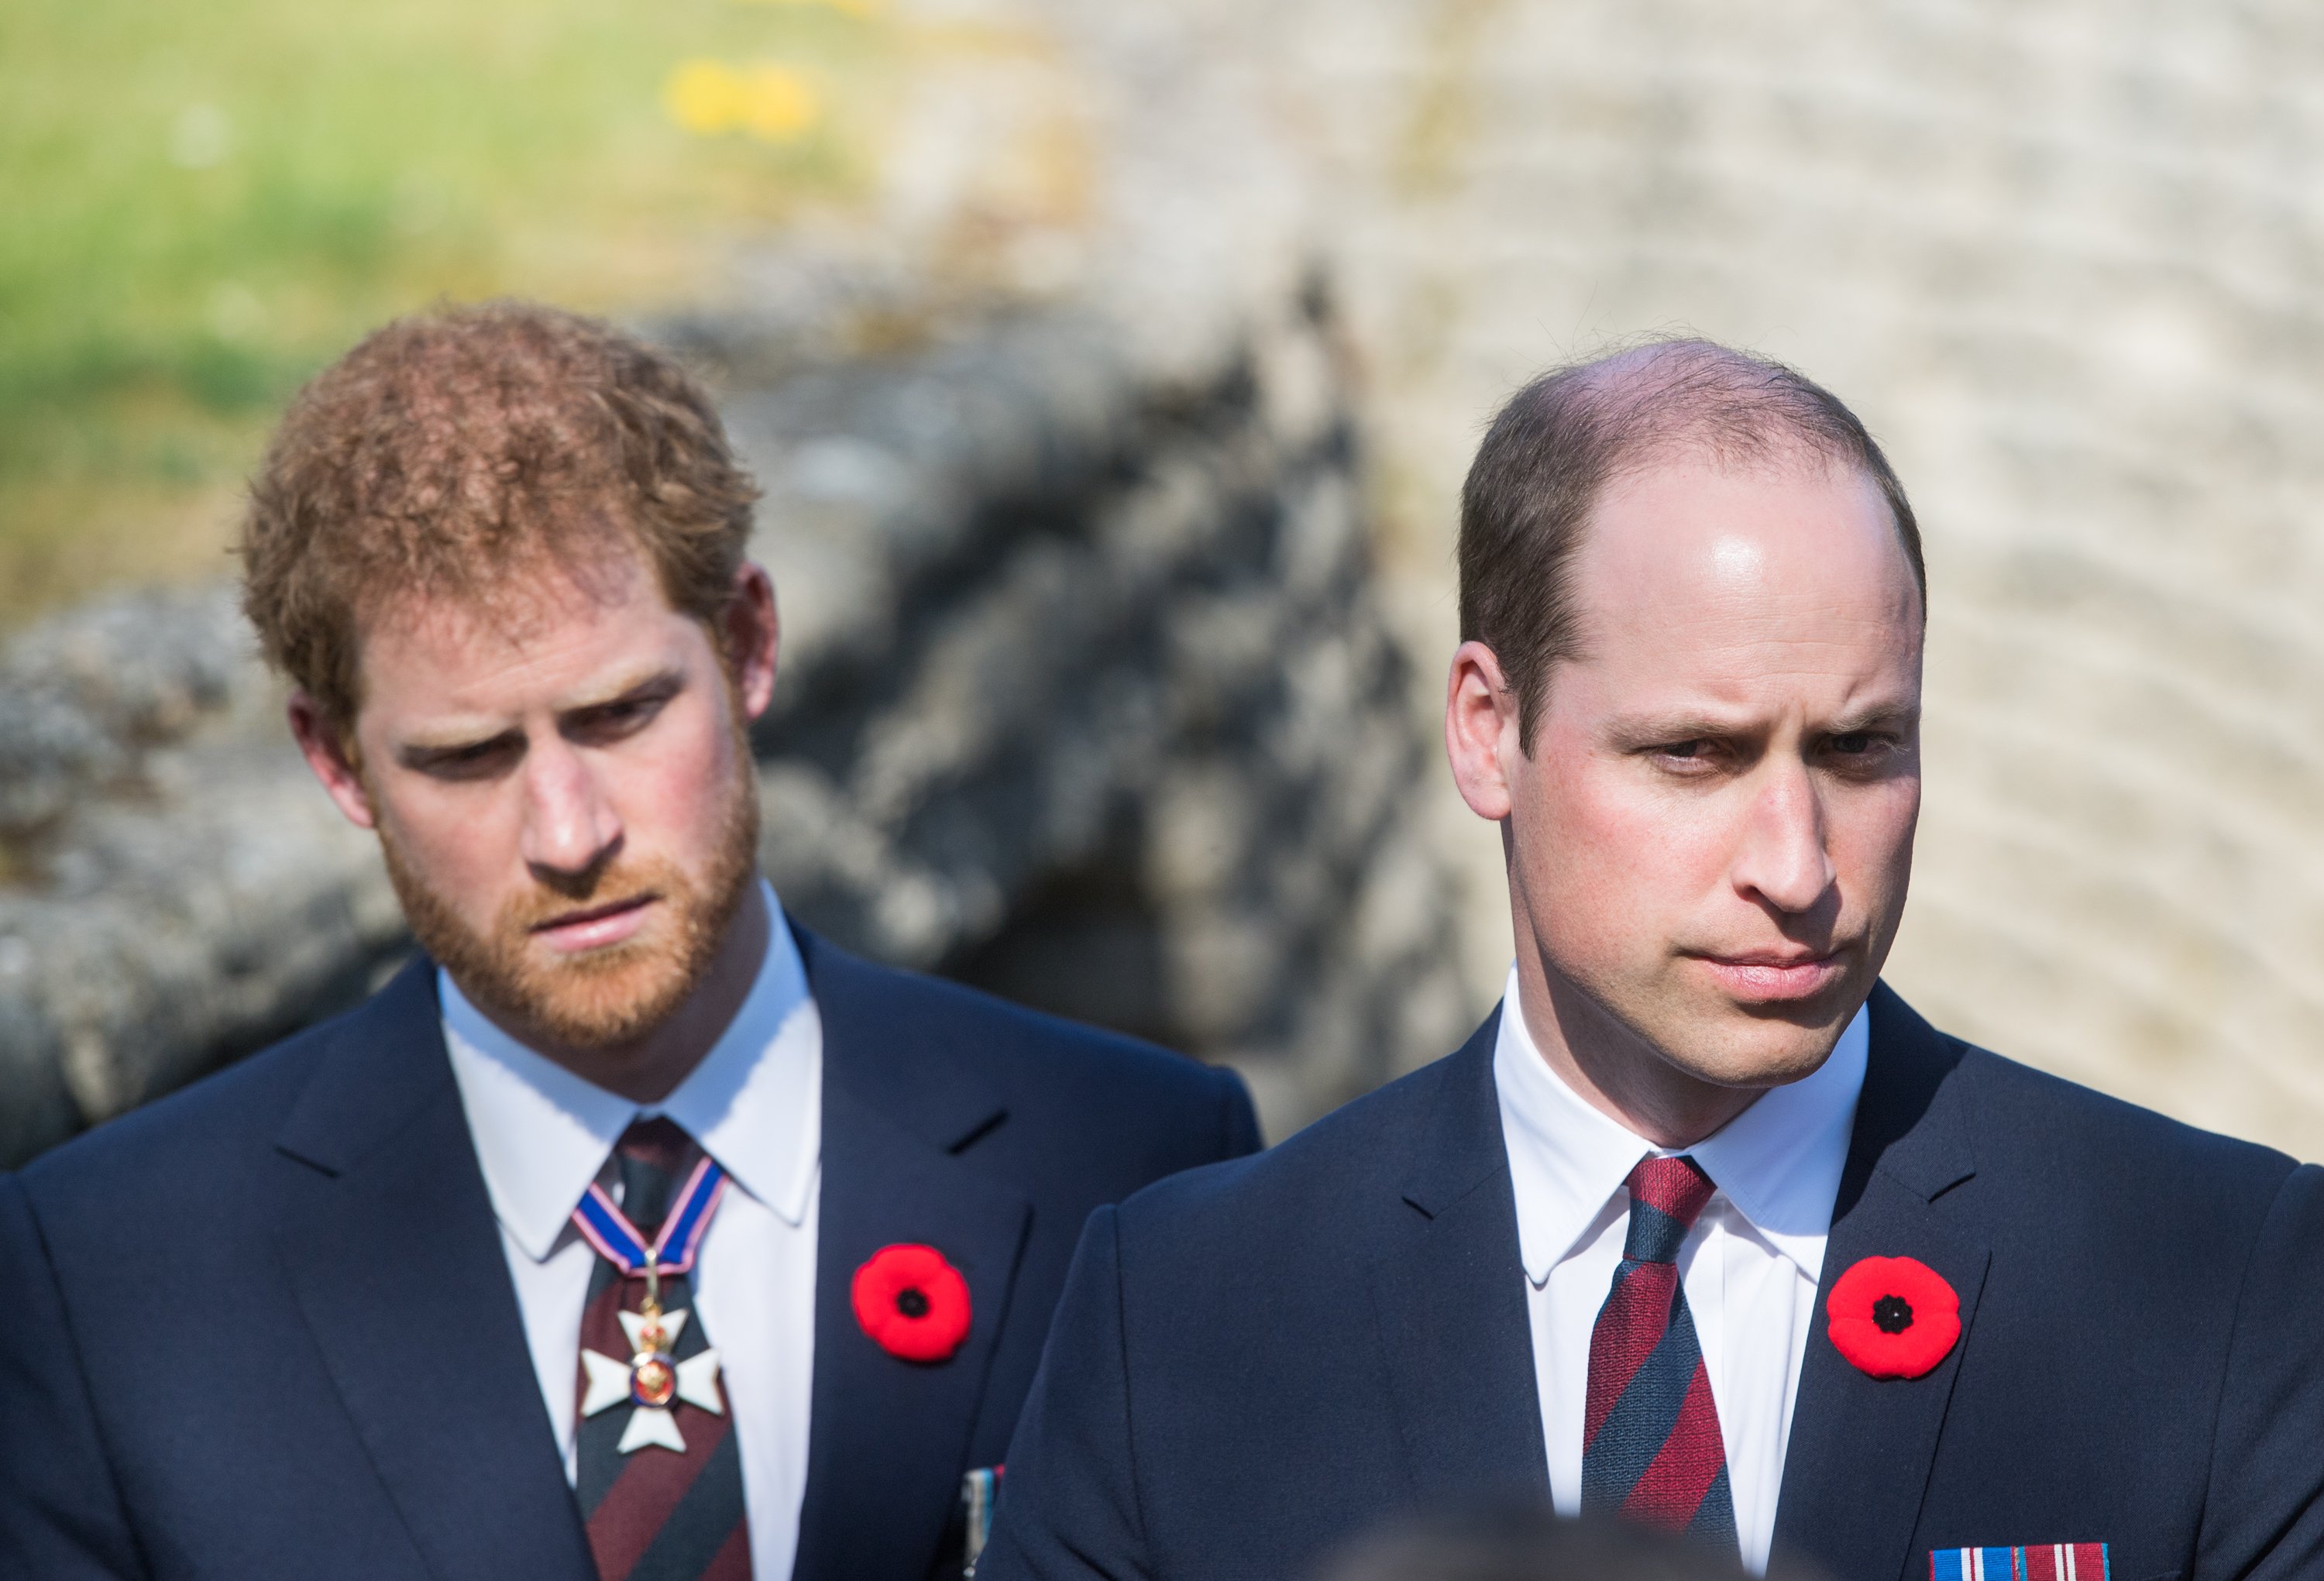 Prince William, Duke of Cambridge and Prince Harry, Duke of Sussex during the commemorations for the 100th anniversary of the battle of Vimy Ridge on April 9, 2017 in Lille, France. | Source: Getty Images